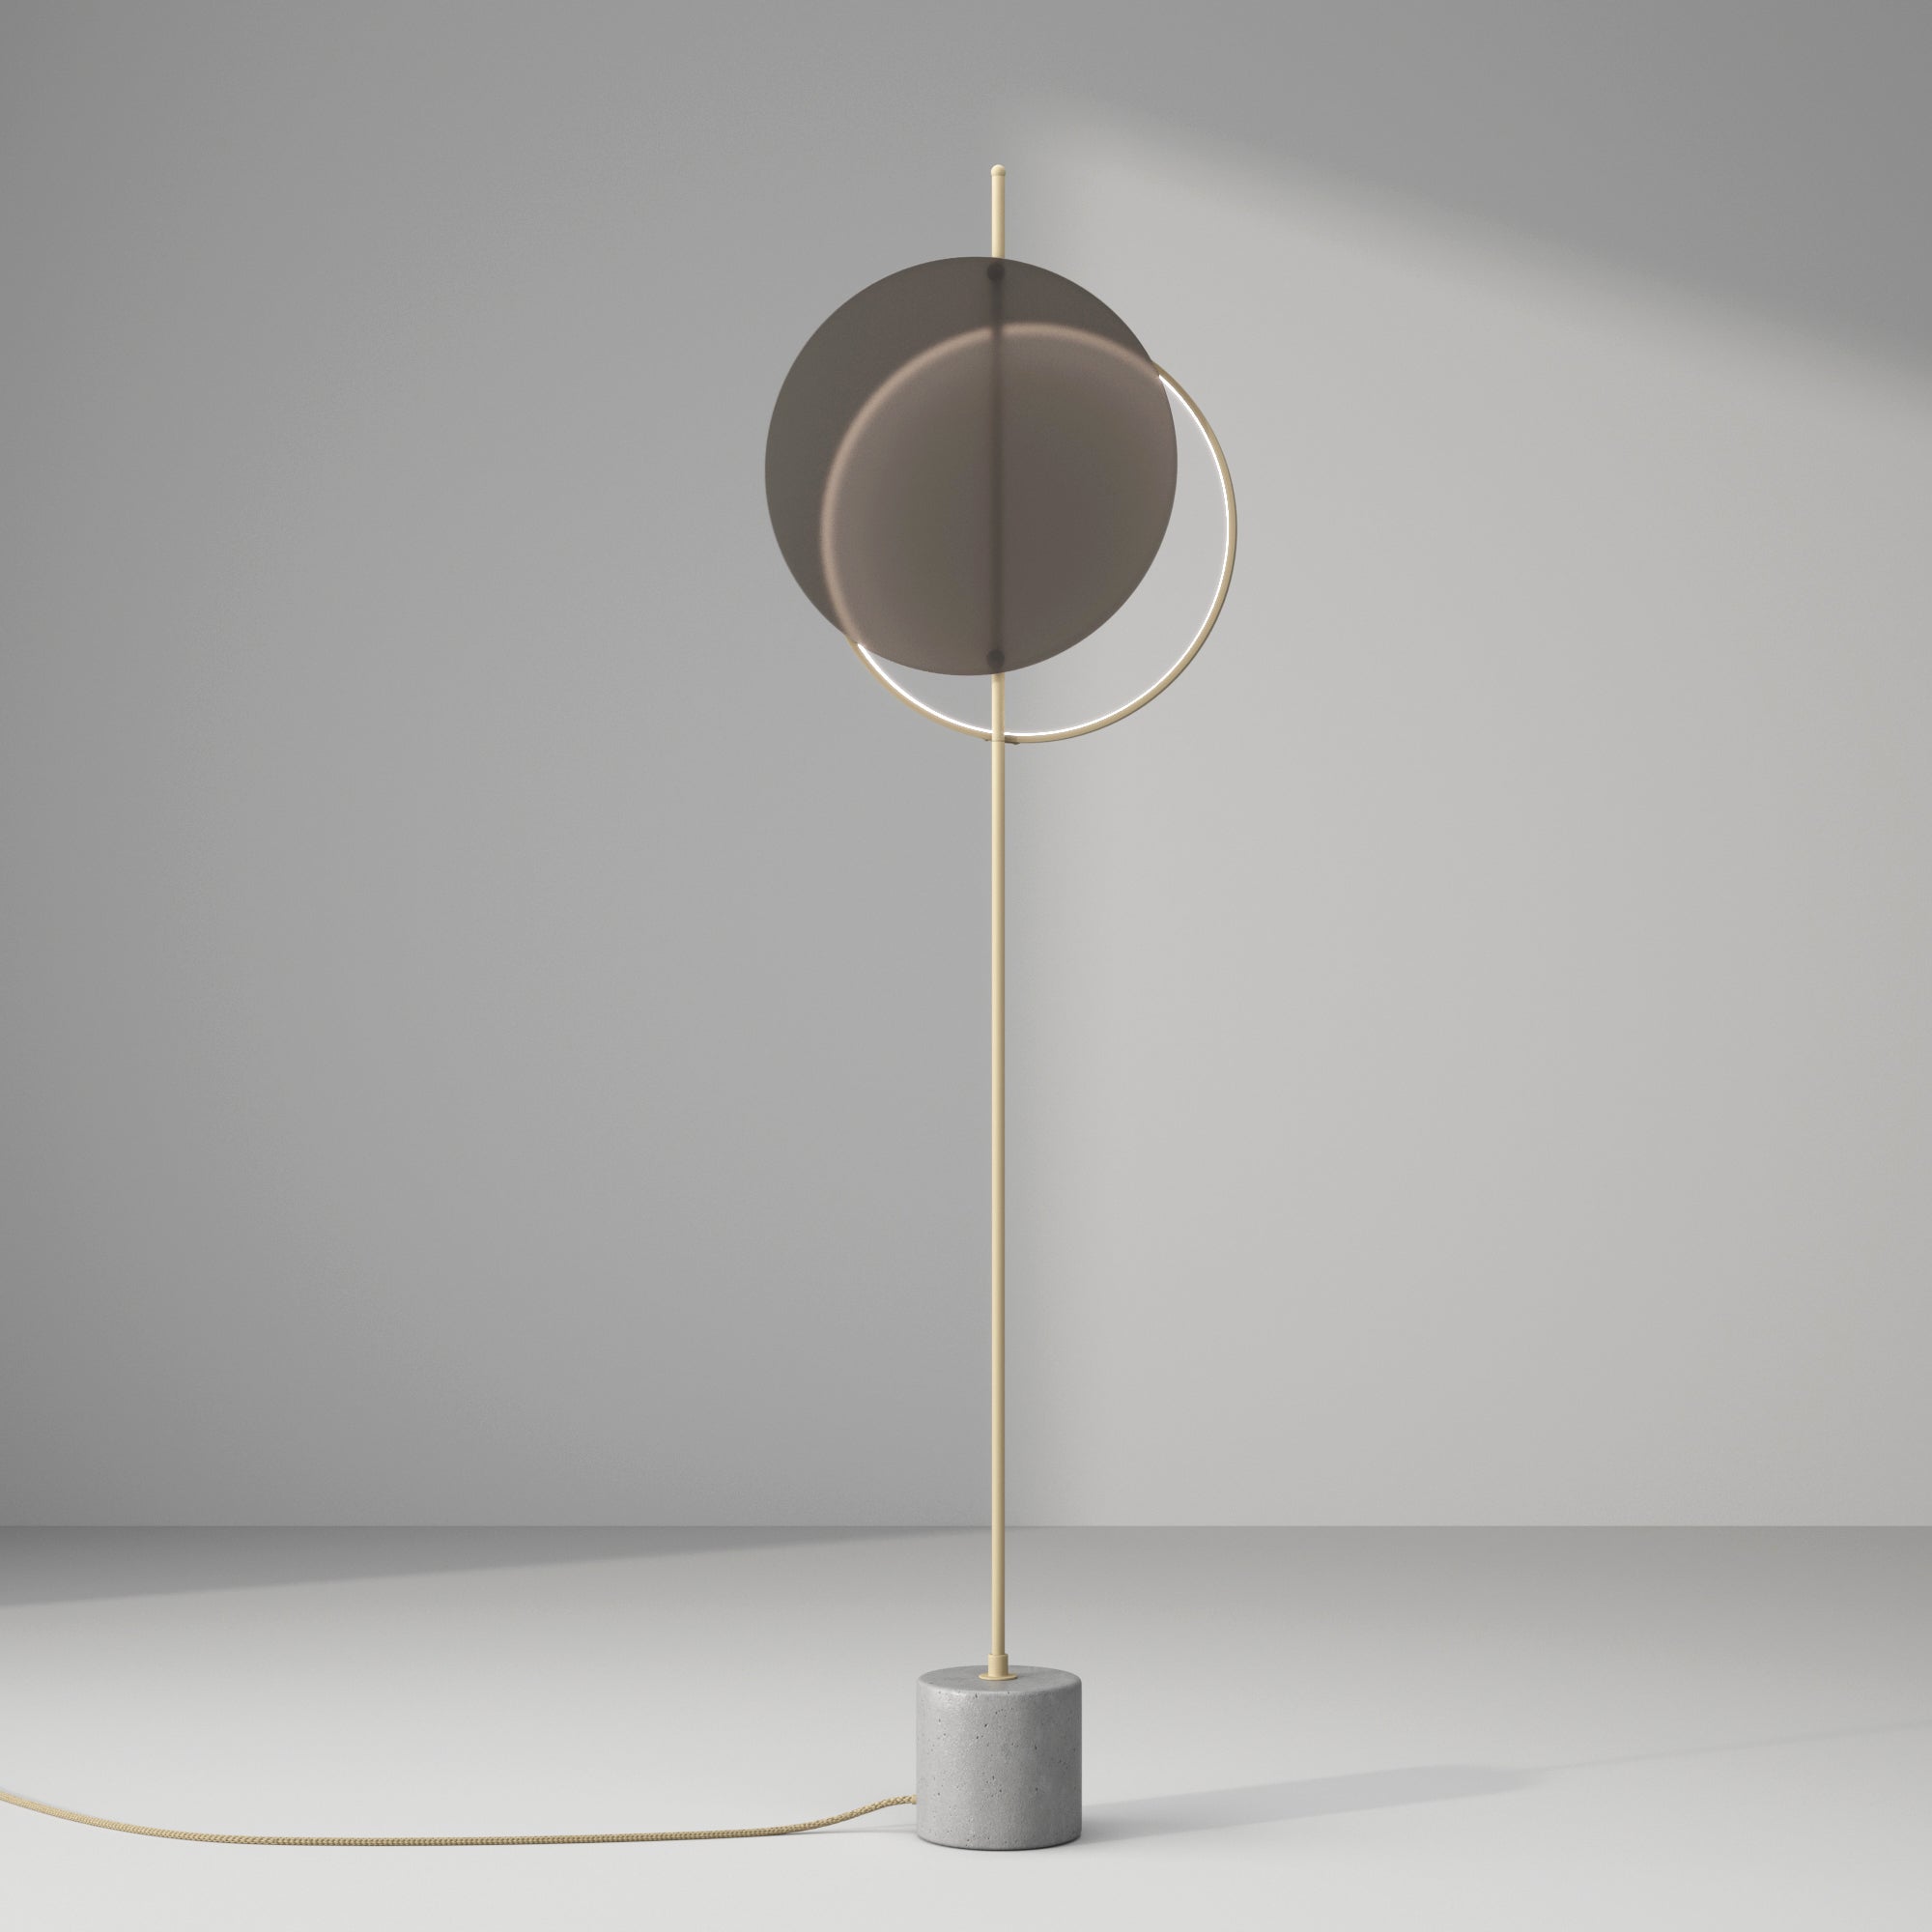 Stylish Minimalistic Contemporary Floor Lamp Glass Edition For Sale